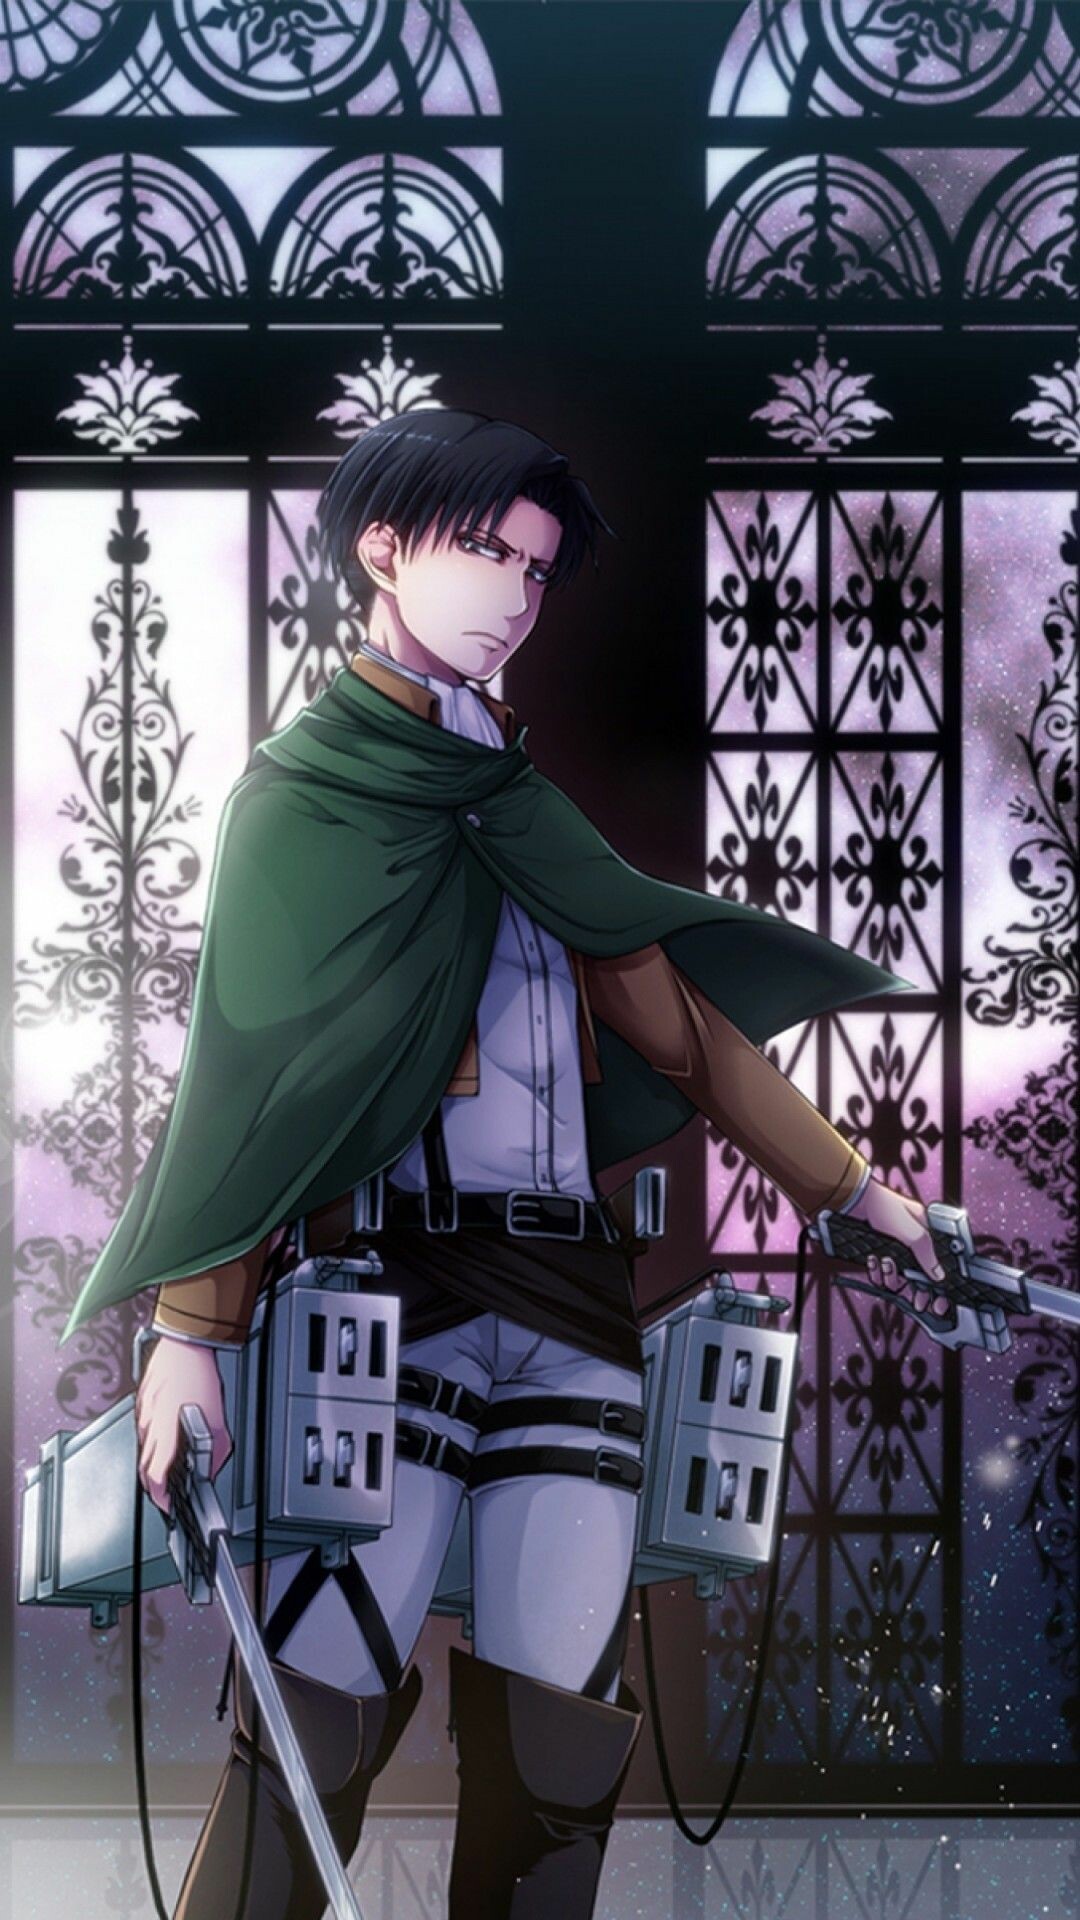 Attack on Titan: The Final Season: Levi Ackerman, one of the strongest fighters in the Survey Corps and serves as a squad captain. 1080x1920 Full HD Wallpaper.